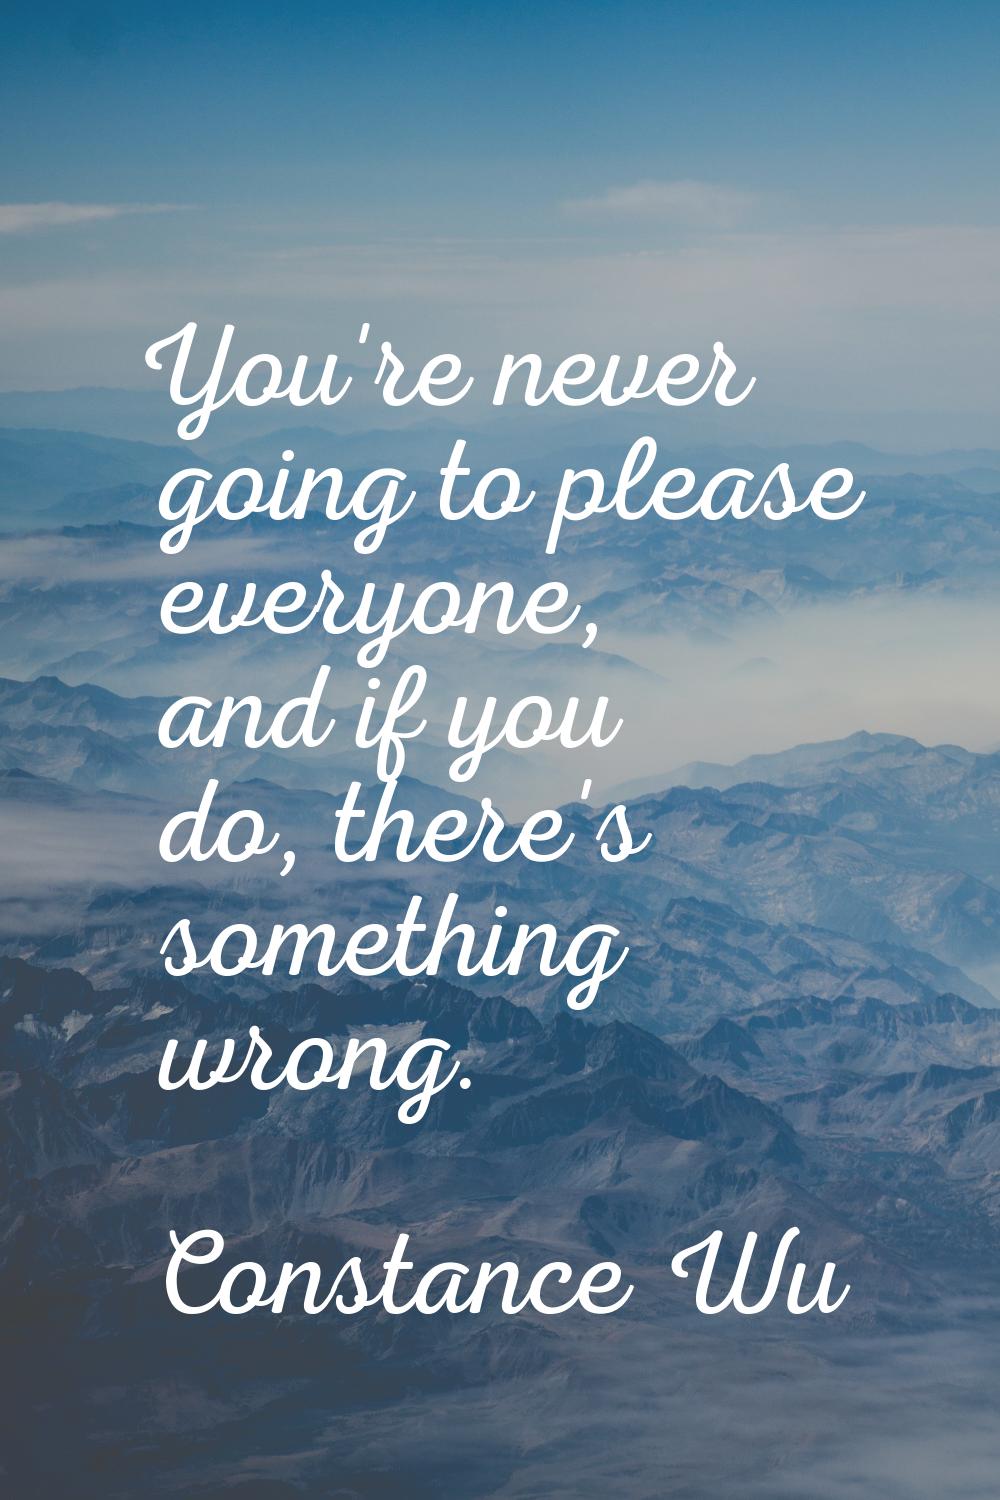 You're never going to please everyone, and if you do, there's something wrong.